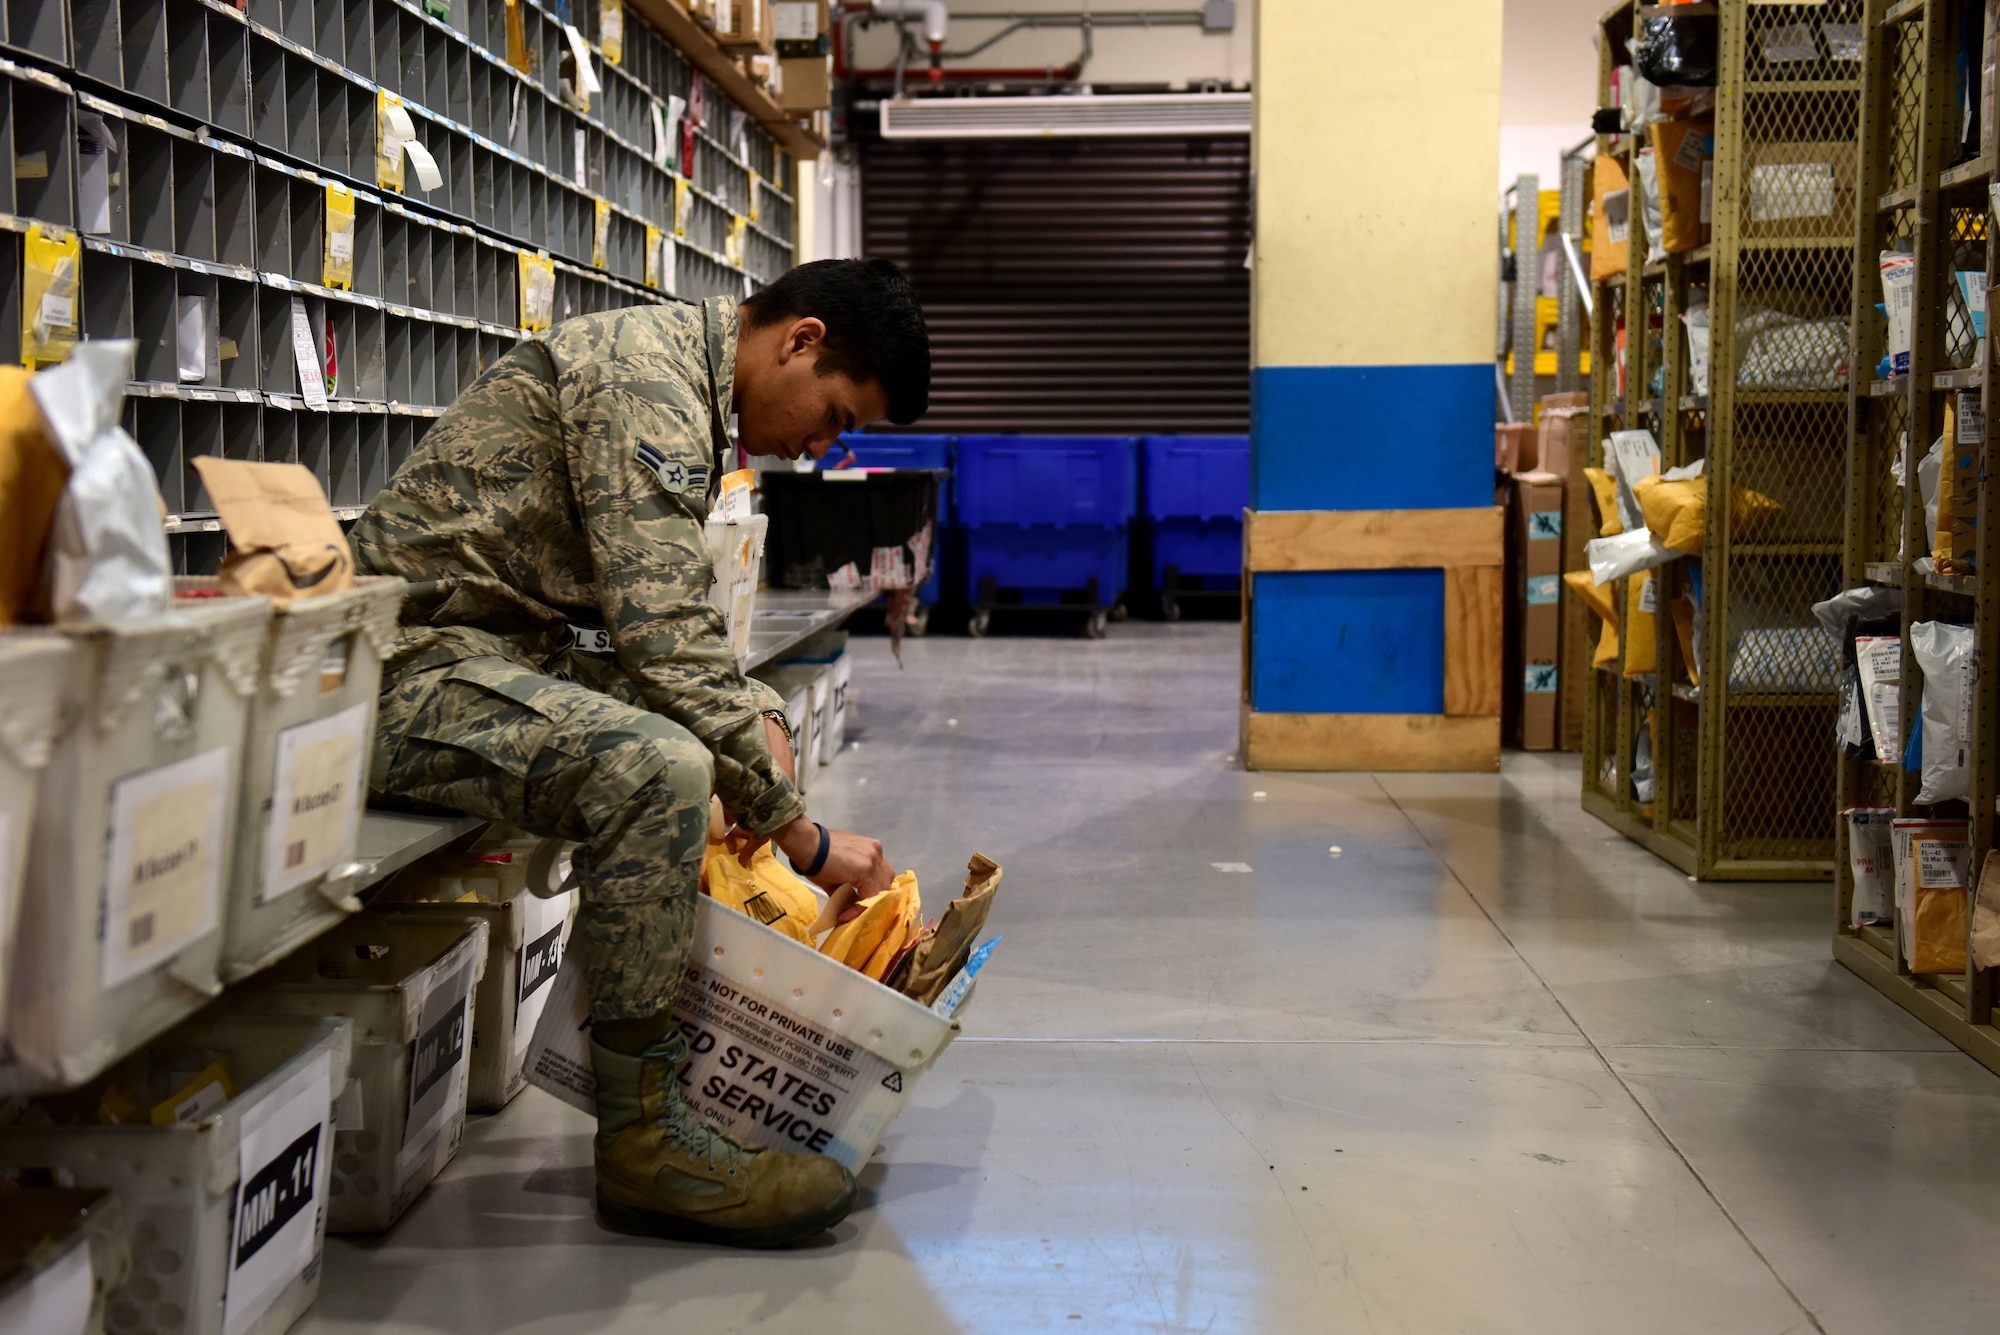 U.S. Air Force Airman 1st Class Daniel Young, 31st Force Support Squadron postal clerk, places labels onto packages at the Aviano Post Office, Aviano Air Base, Italy, March 25, 2020. After sorting, each package receives a label denoting the recipient and its location on the shelf. (U.S. Air Force photo by Staff Sgt. Kelsey Tucker)